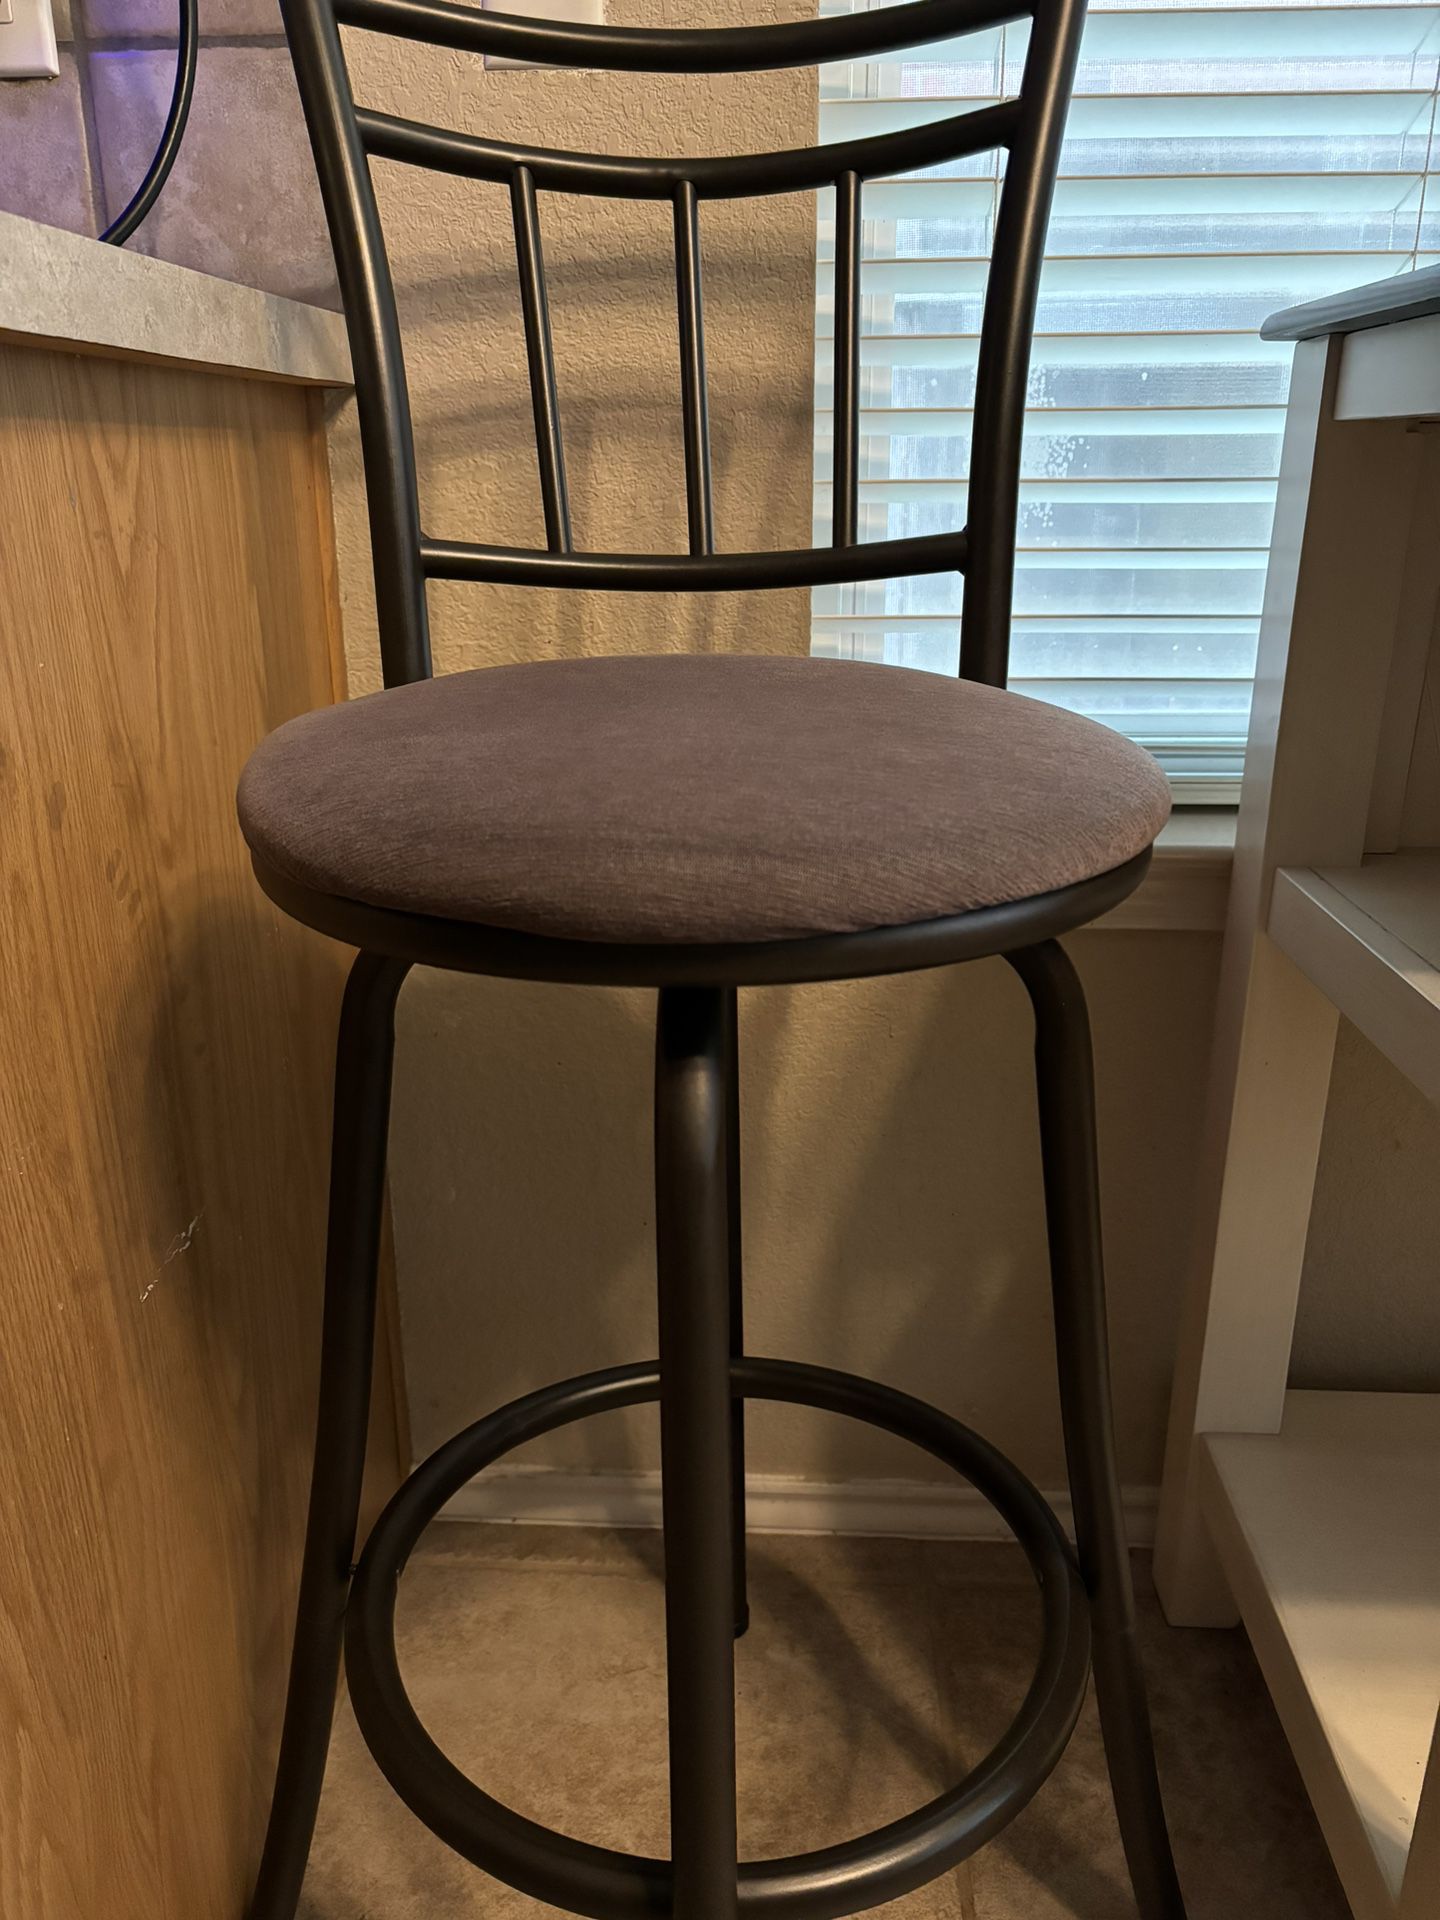 Chairs/stools